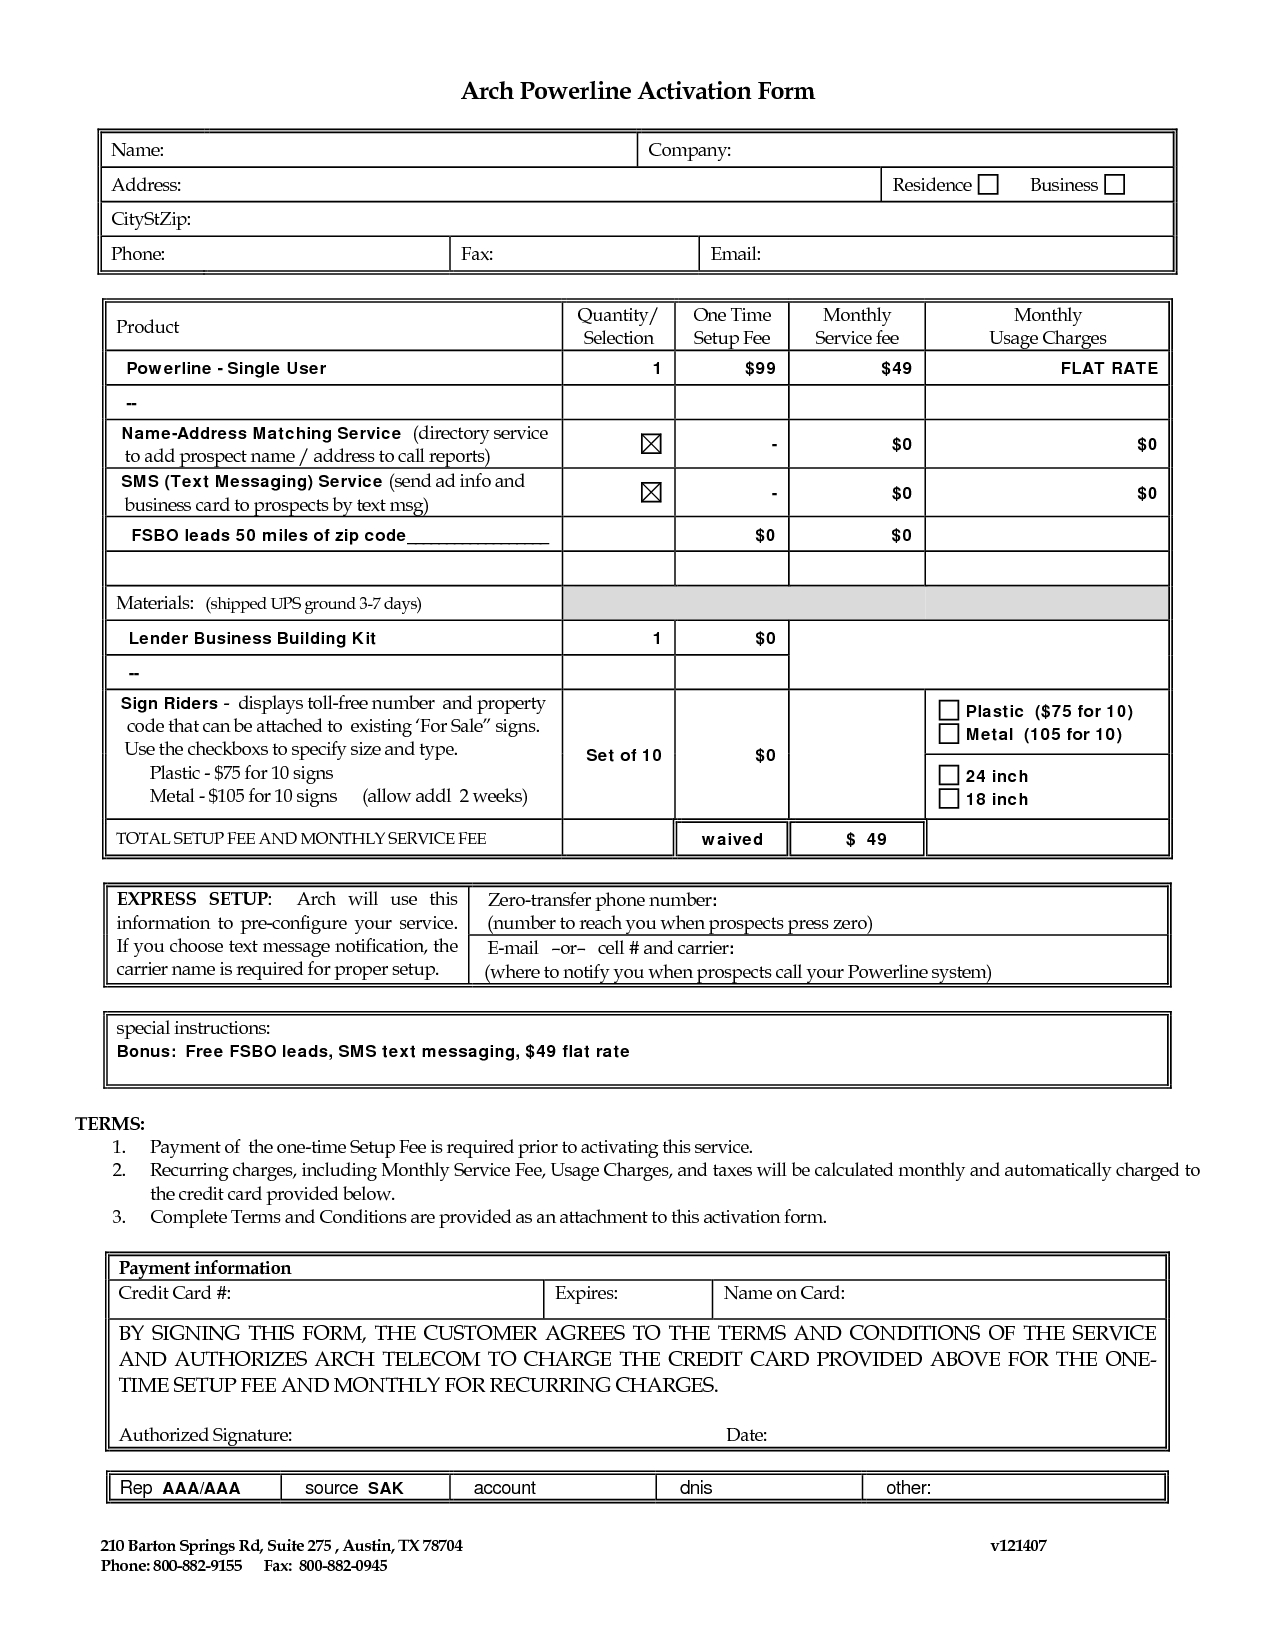 023 Template Ideas Sales Call Reporting Weekly Report Throughout Sales Rep Visit Report Template